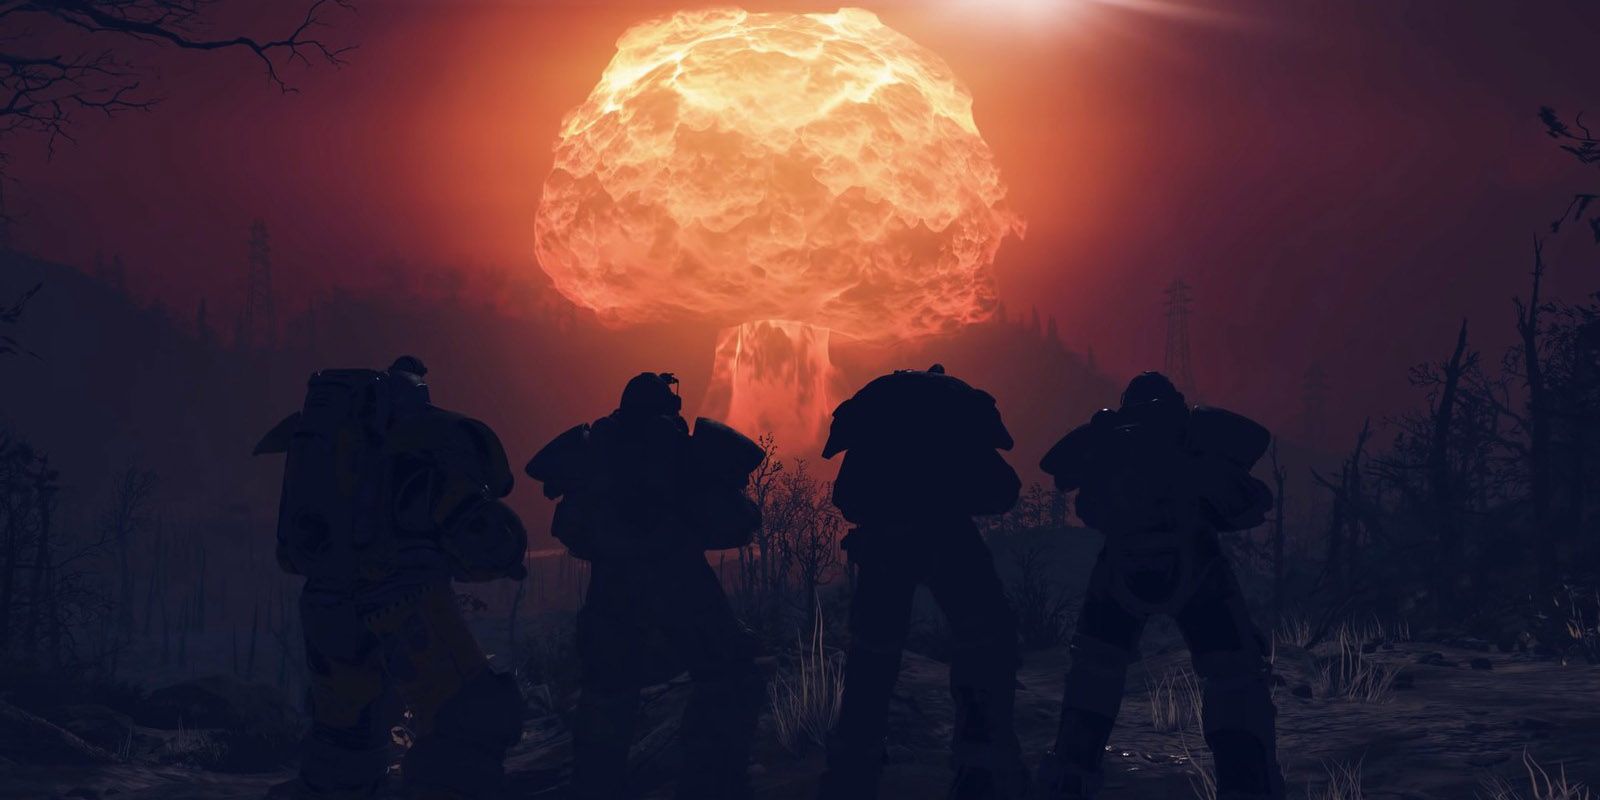 Fallout 76 Players Have Found A Way To Cheat to Get Nukes